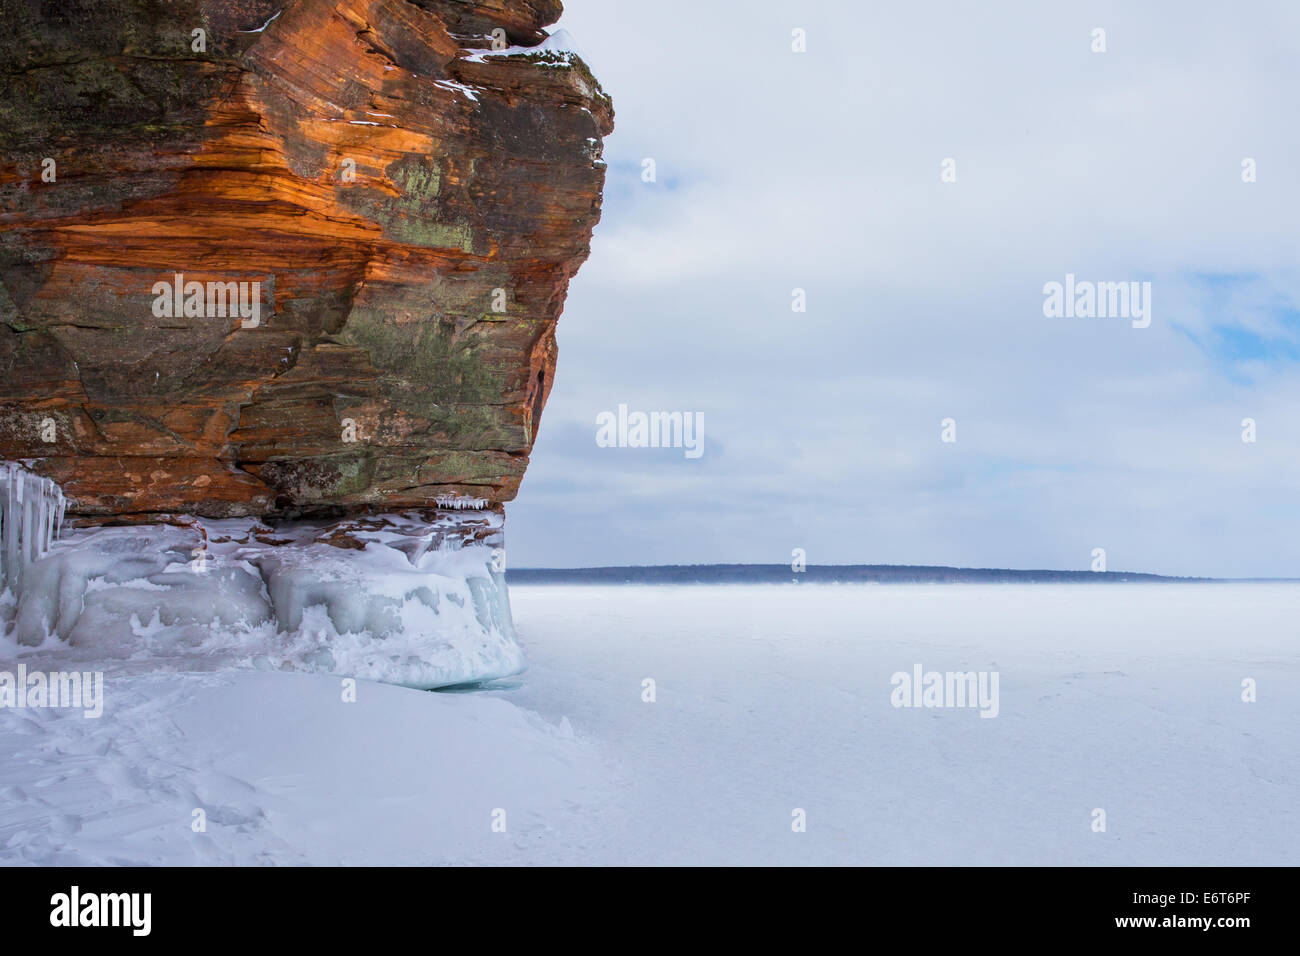 Warm light on rocky cliff / shoreline of a frozen Lake Superior.  Highly textured rock.  Lots of copy space to the right. Stock Photo